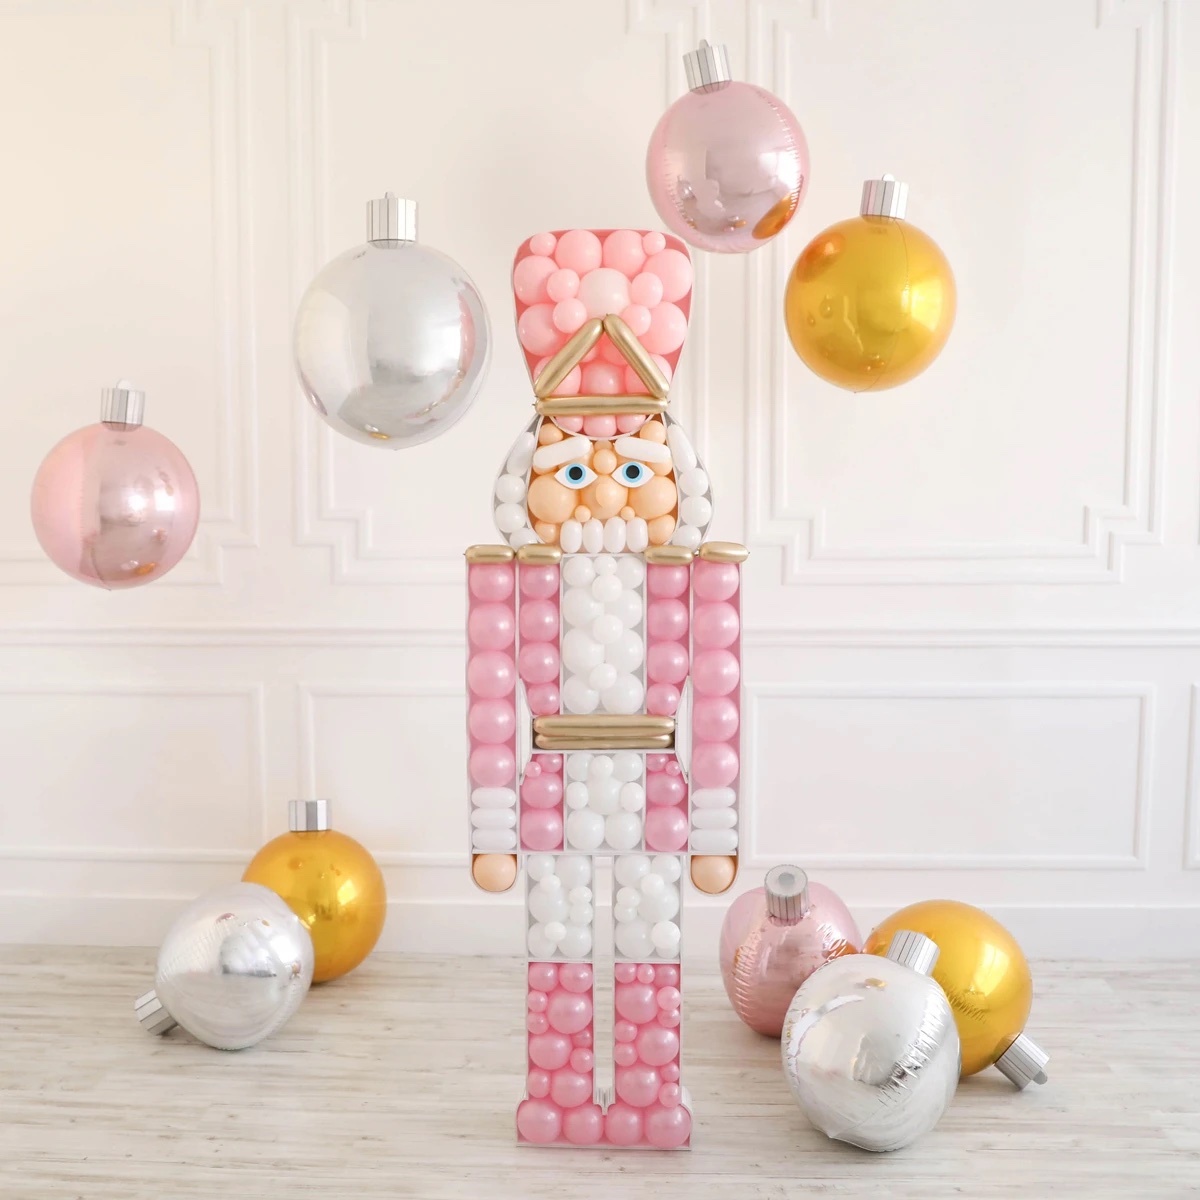 nutcracker display made with pink and white balloons